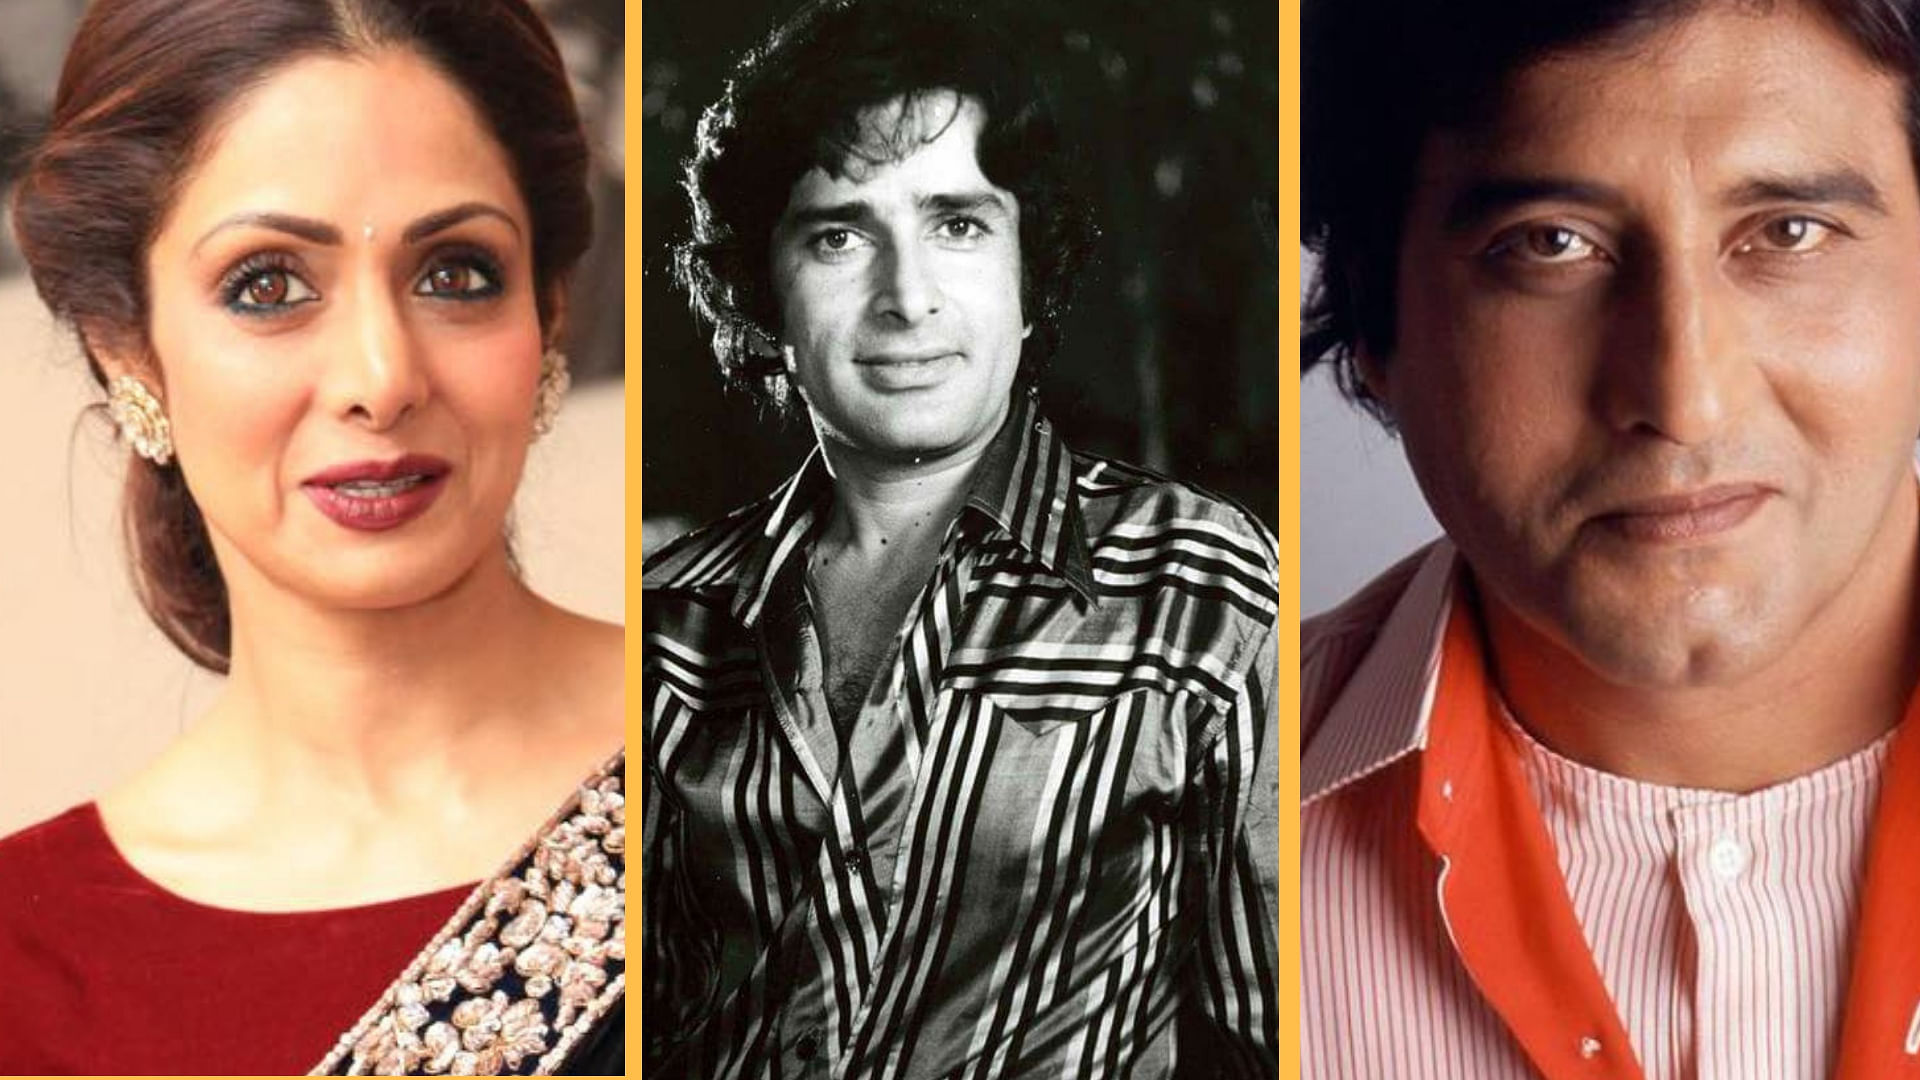 The 49th edition of the International Film Festival of India will pay tributes to late actors Shashi Kapoor, Sridevi and Vinod Khanna, one of the organisers said.